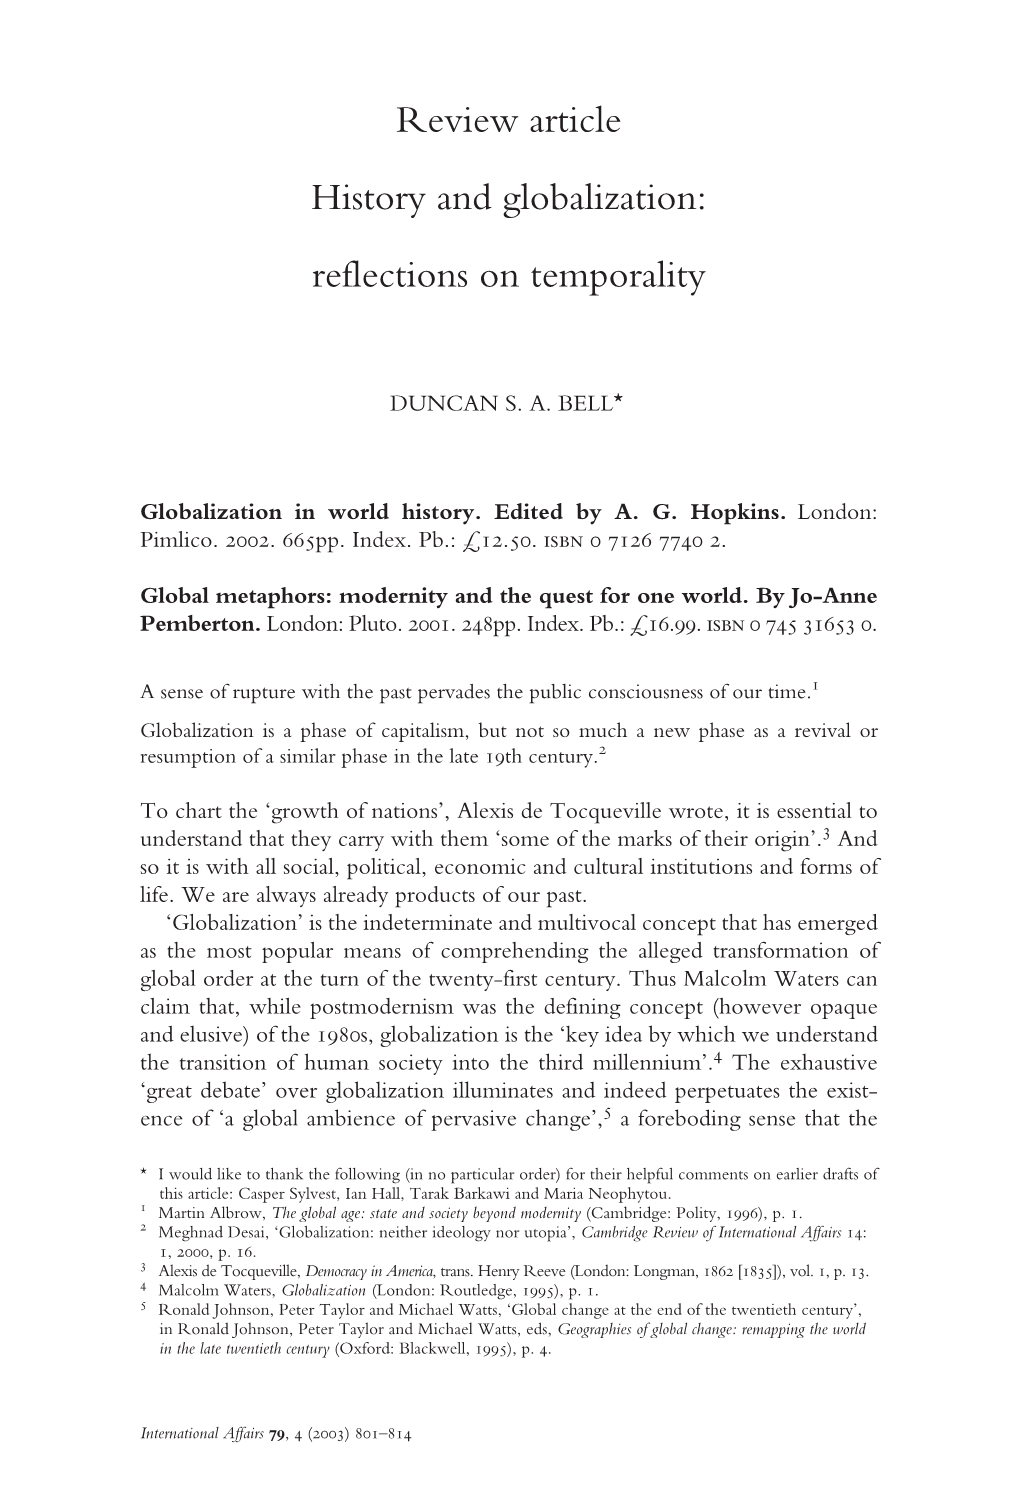 Review Article History and Globalization: Reflections on Temporality